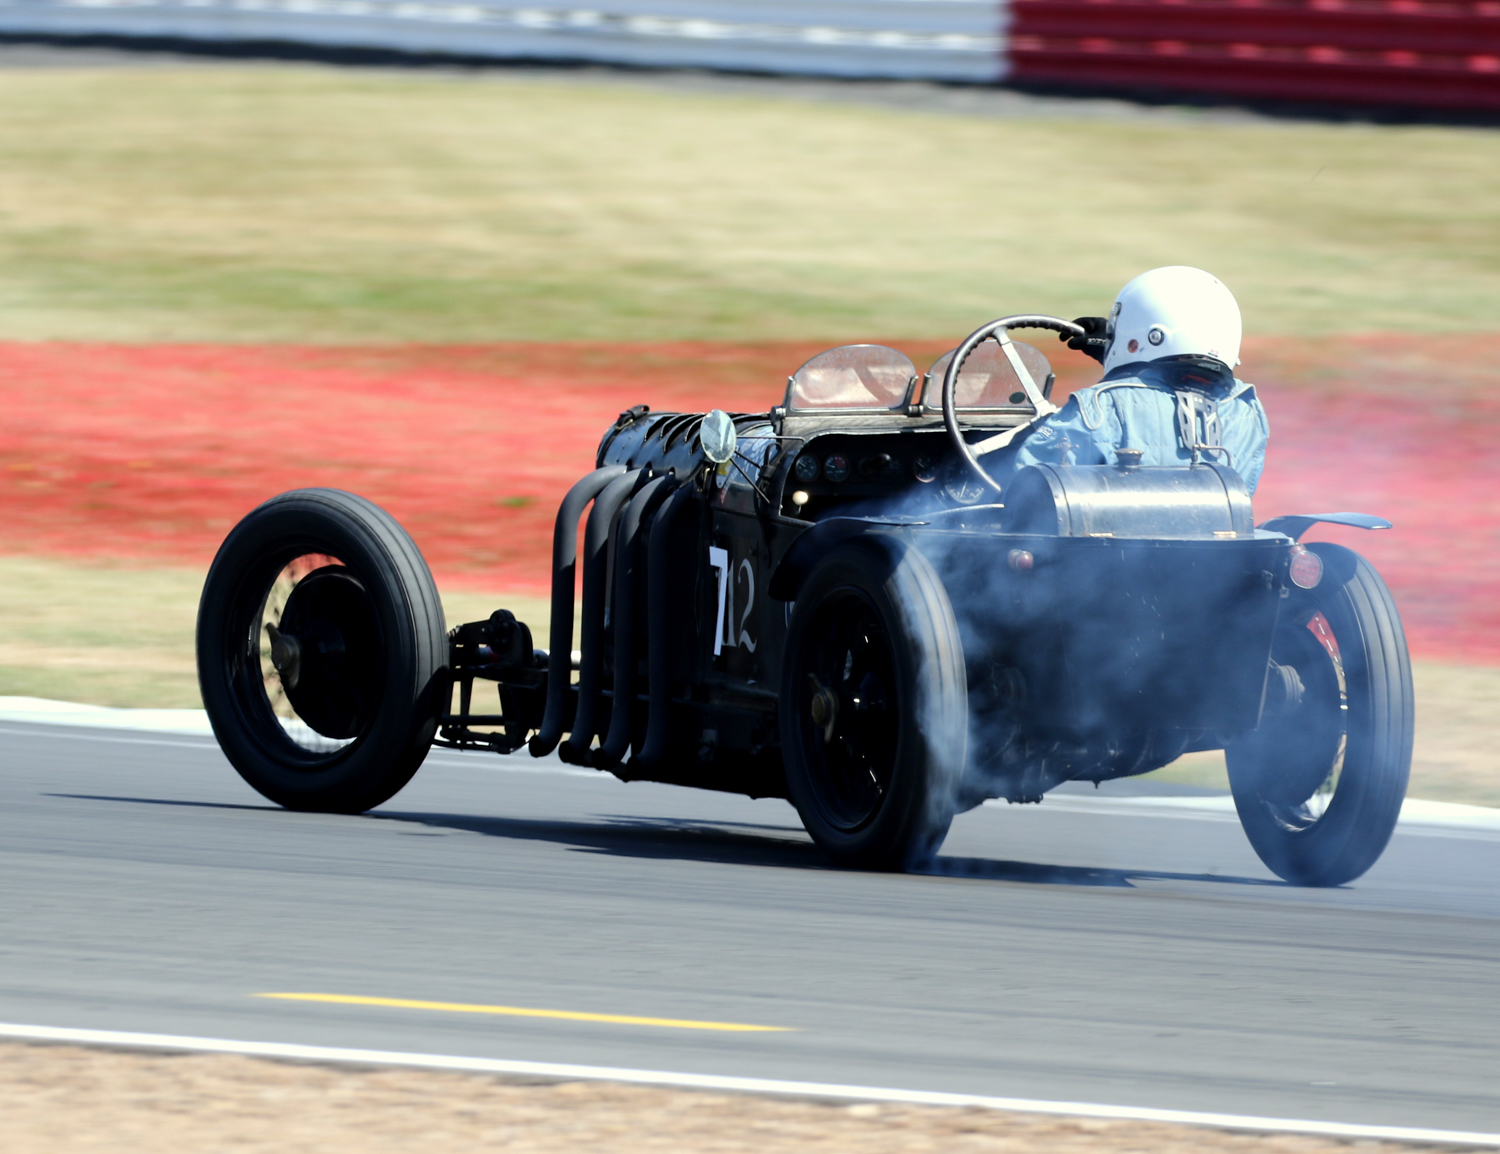 1926 GN PARKER BURNING RUBBER. Picasa